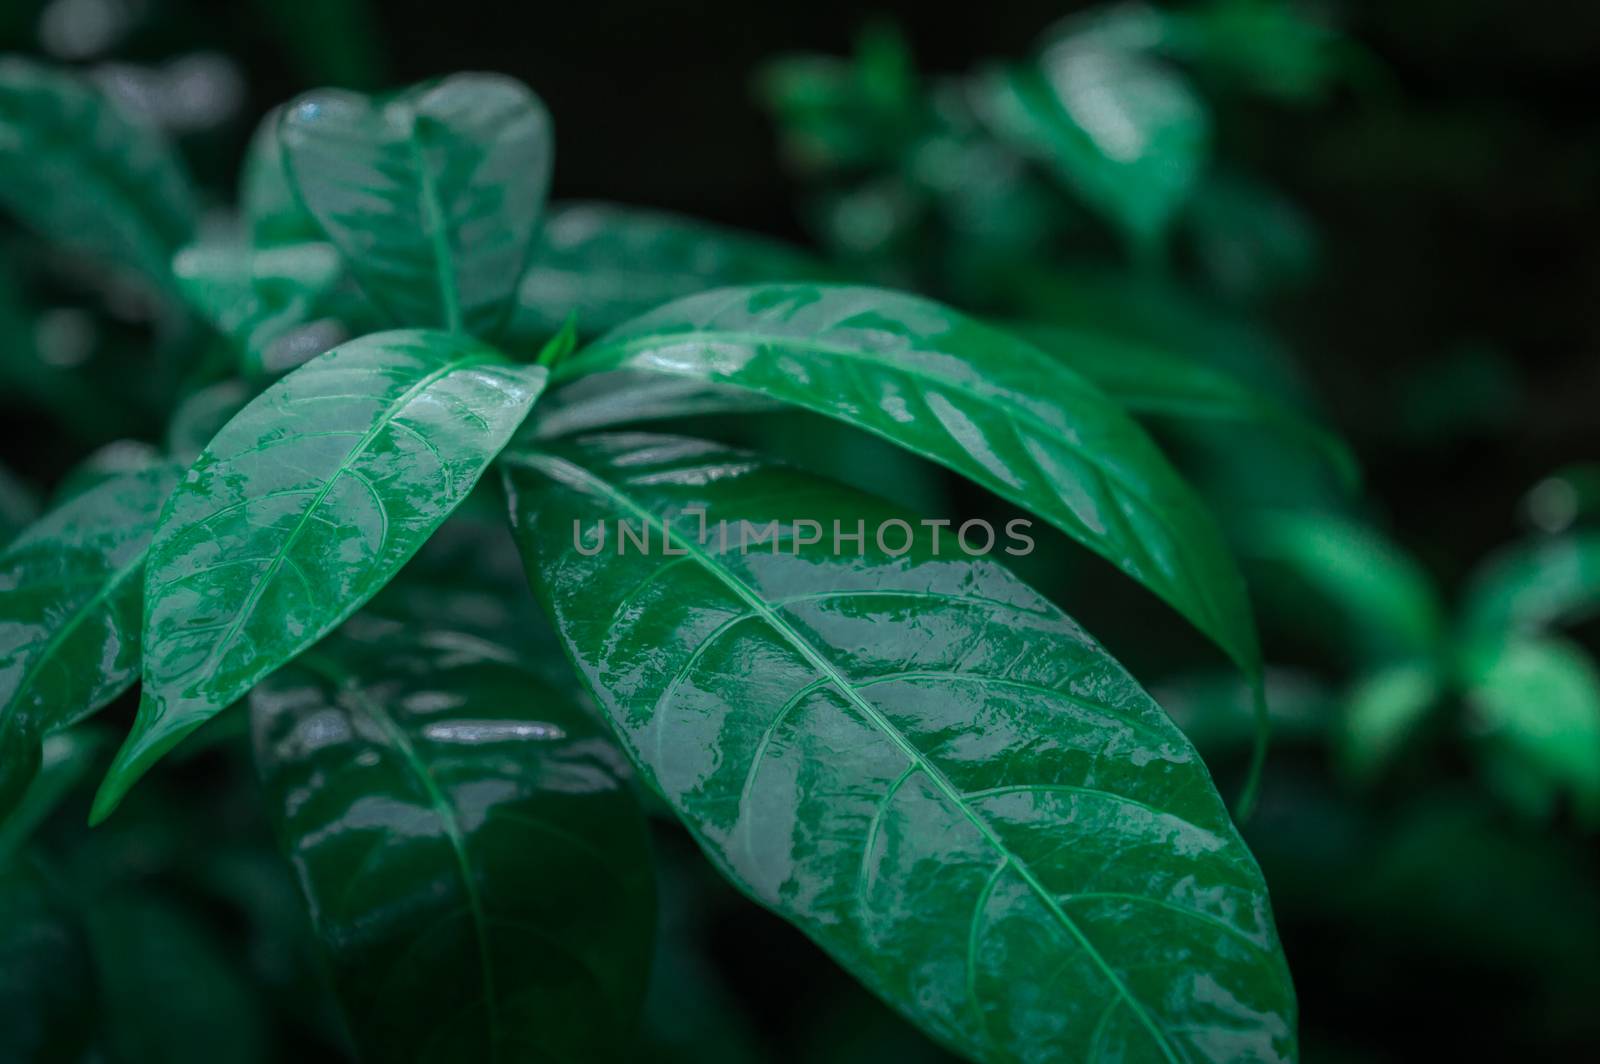 Leaves in rain. Wet in water. Beautiful Home Decor Plant drenched in rain. Green leaves background design images. Pictures of nature beauty. rainy day monsoon season pictures for wallpaper decoration.